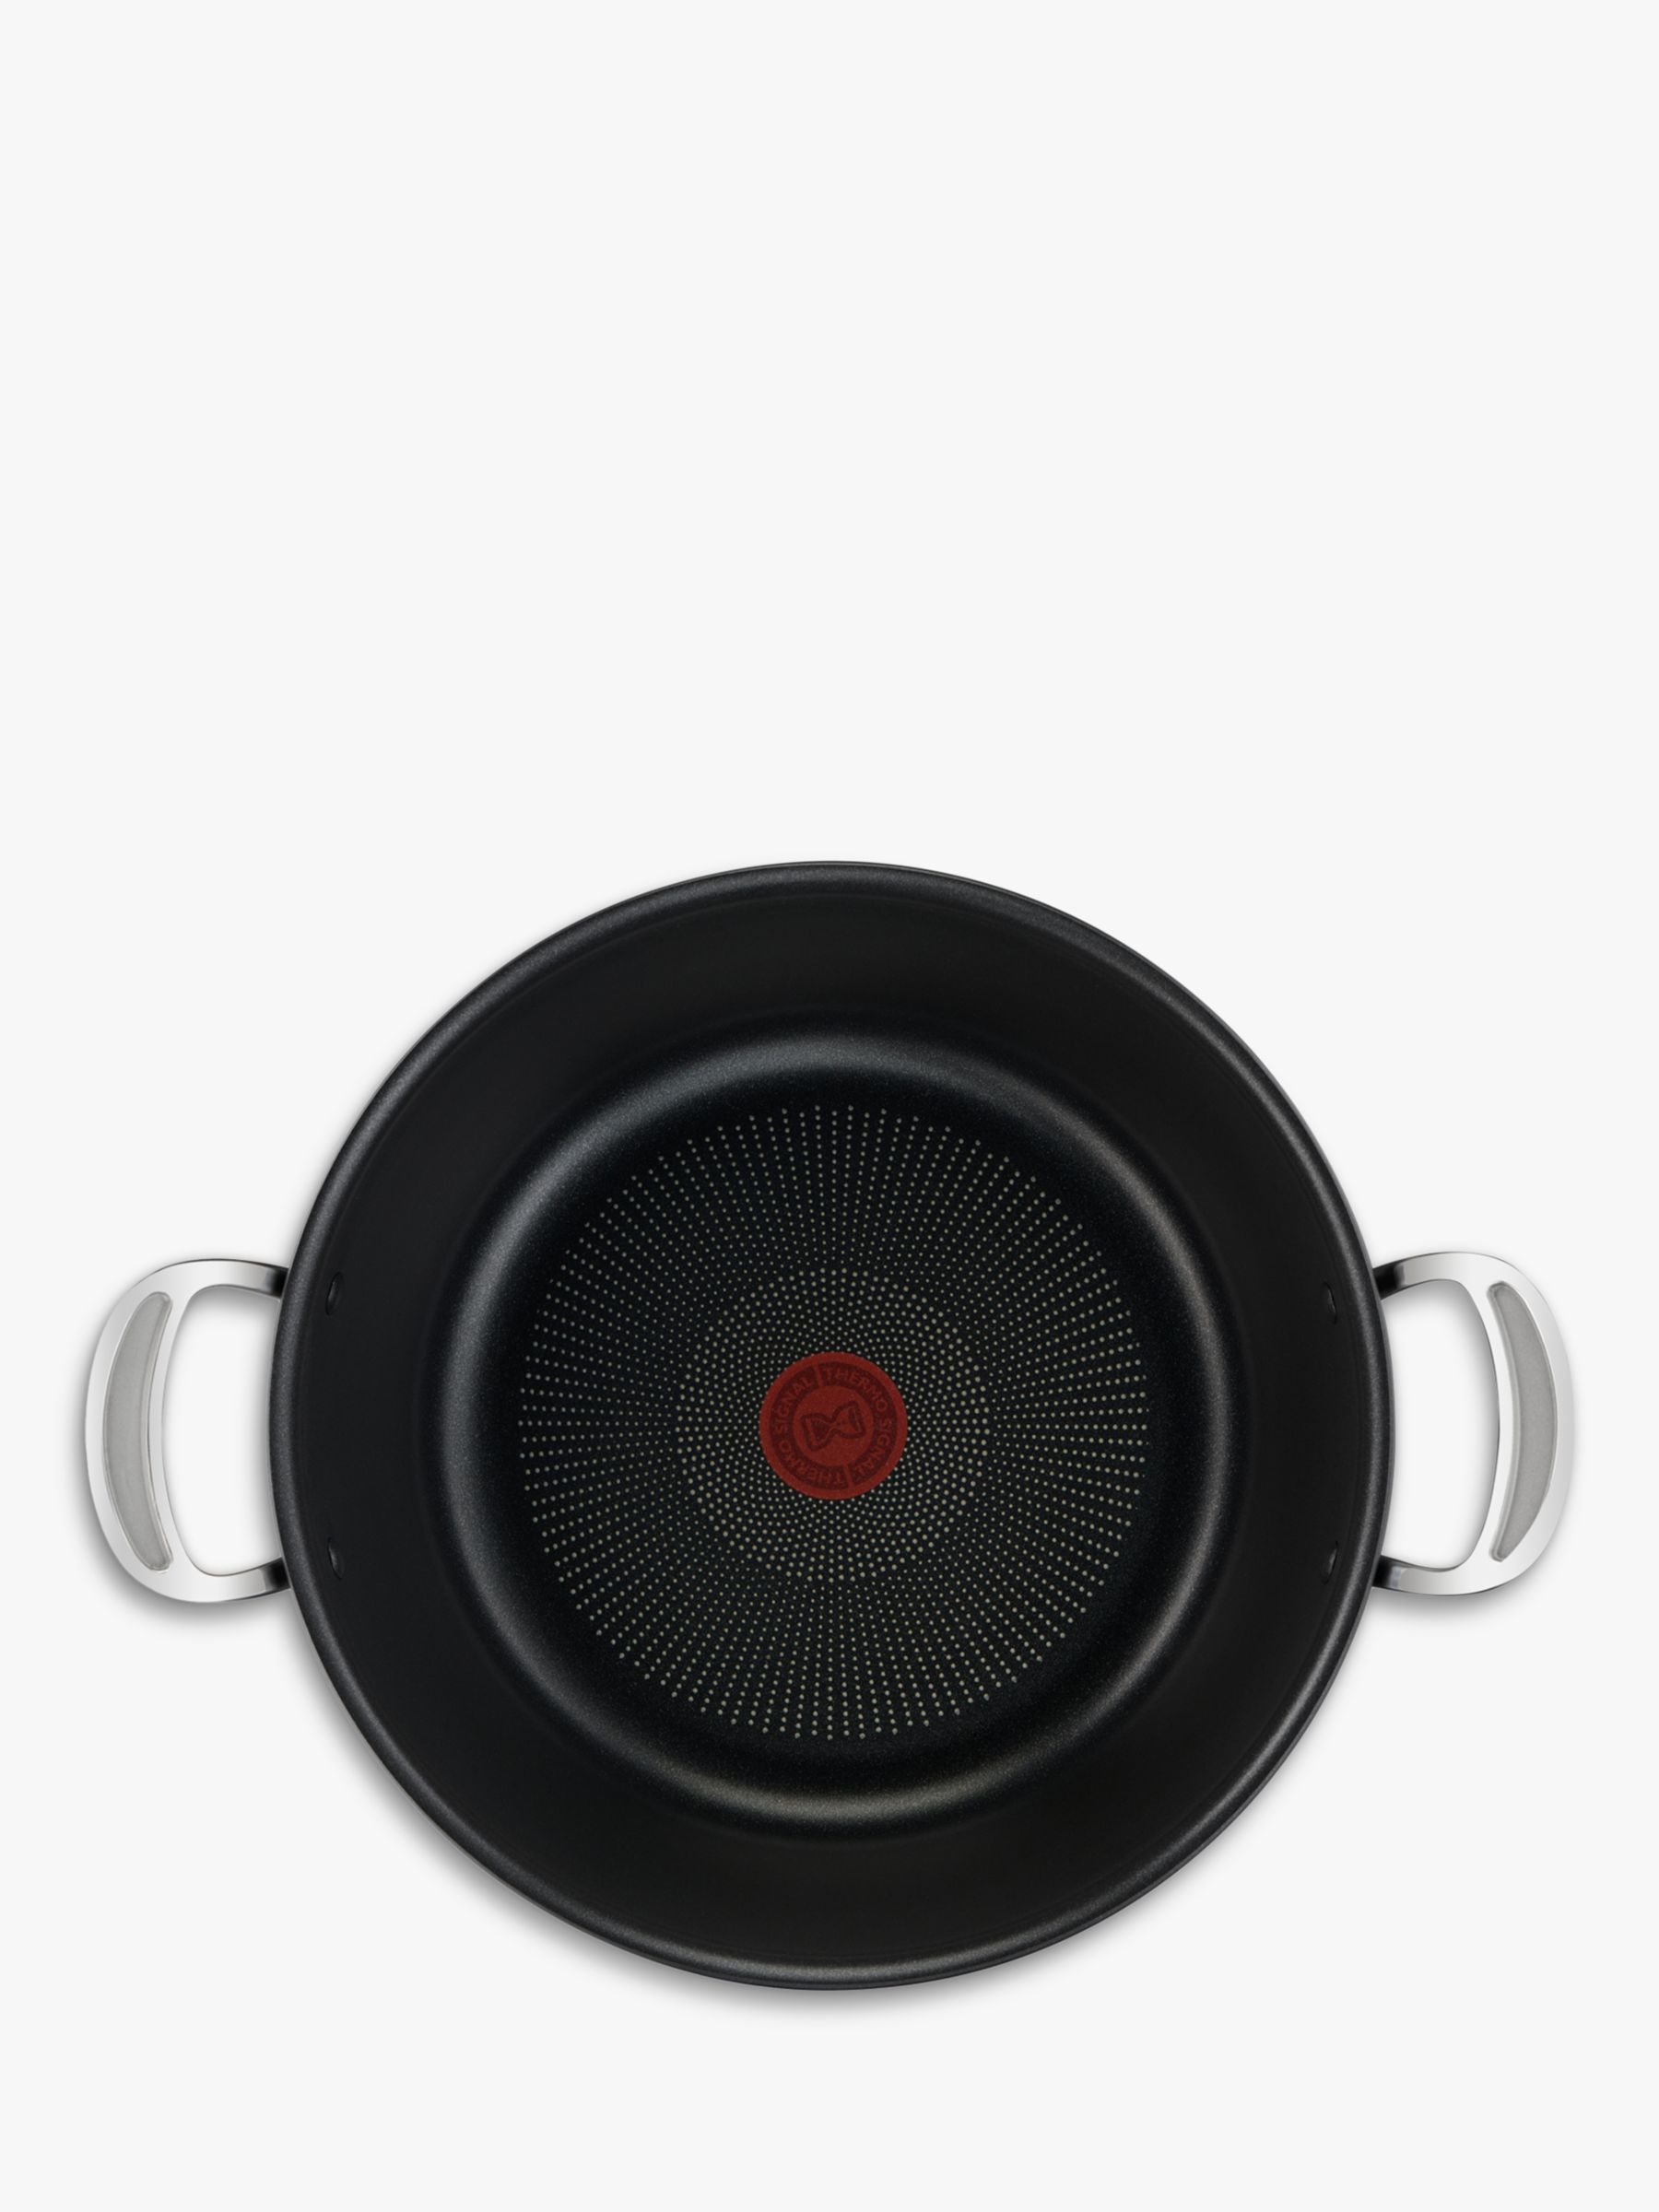 TEFAL JAMIE OLIVER CLASSIC HARD ANODISED 30CM BIG BATCH COOKING PAN -  Warden Brothers